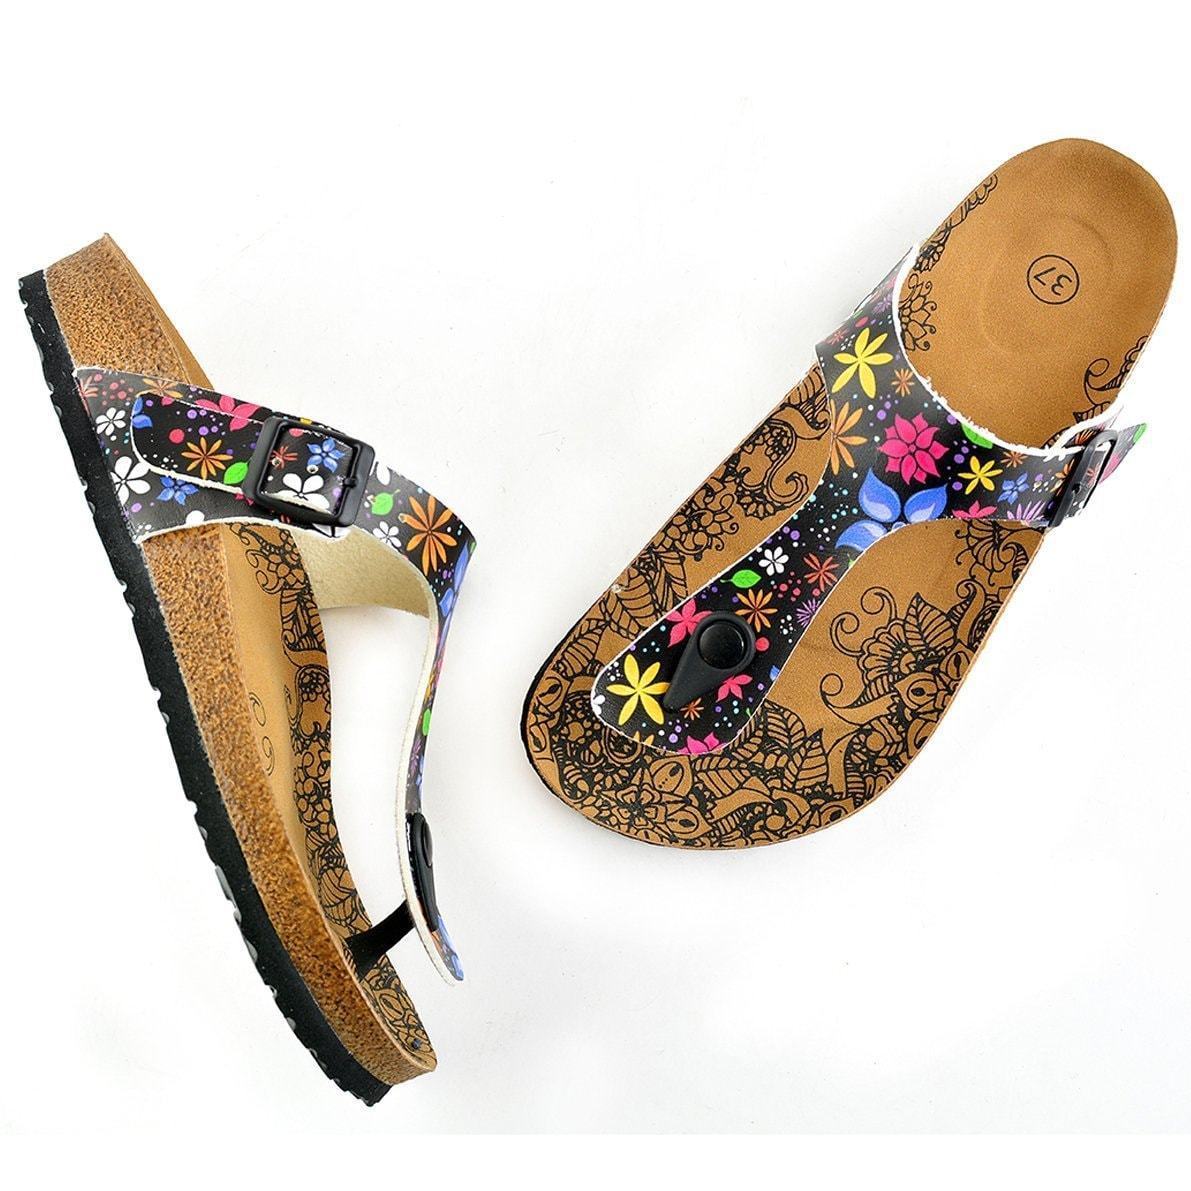 Black & Blue Floral T-Strap Sandal CAL512, Goby, CALCEO Sandal 